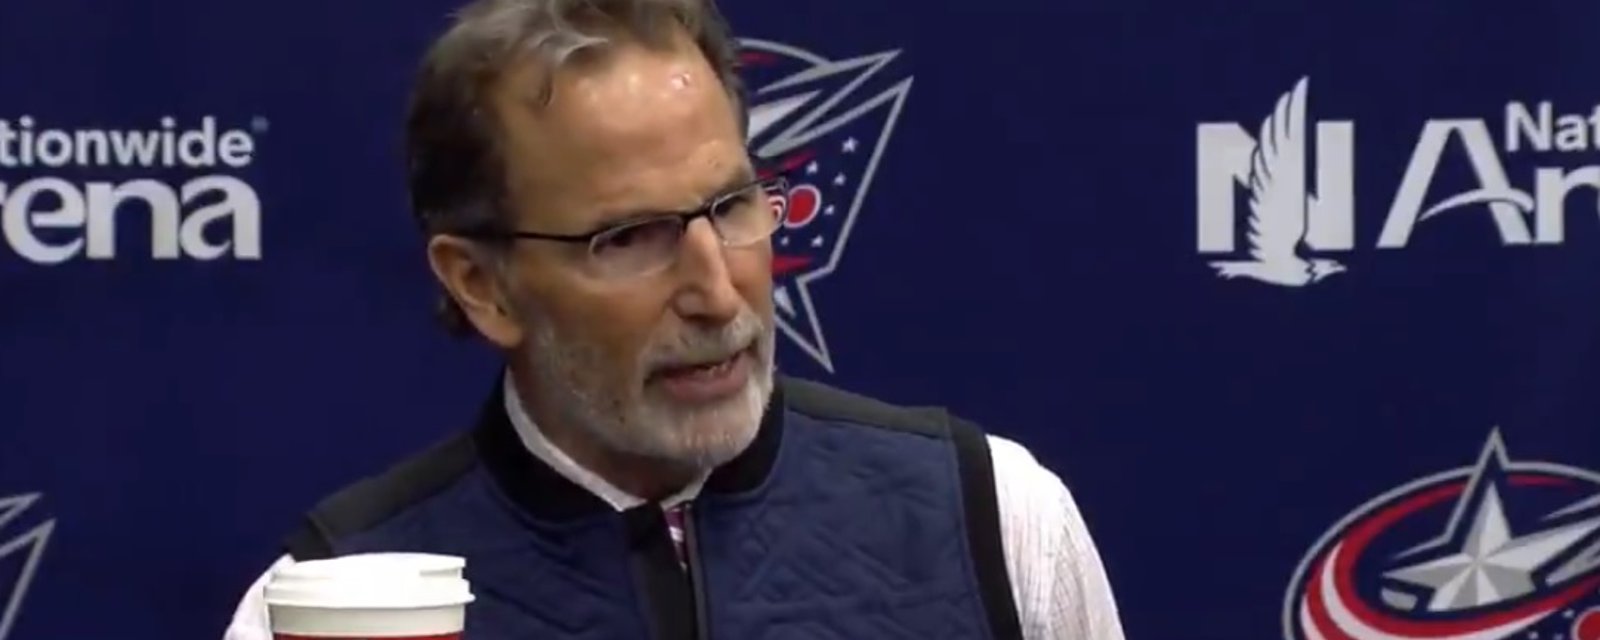 A furious John Tortorella goes off on NHL officiating in post game press conference. 